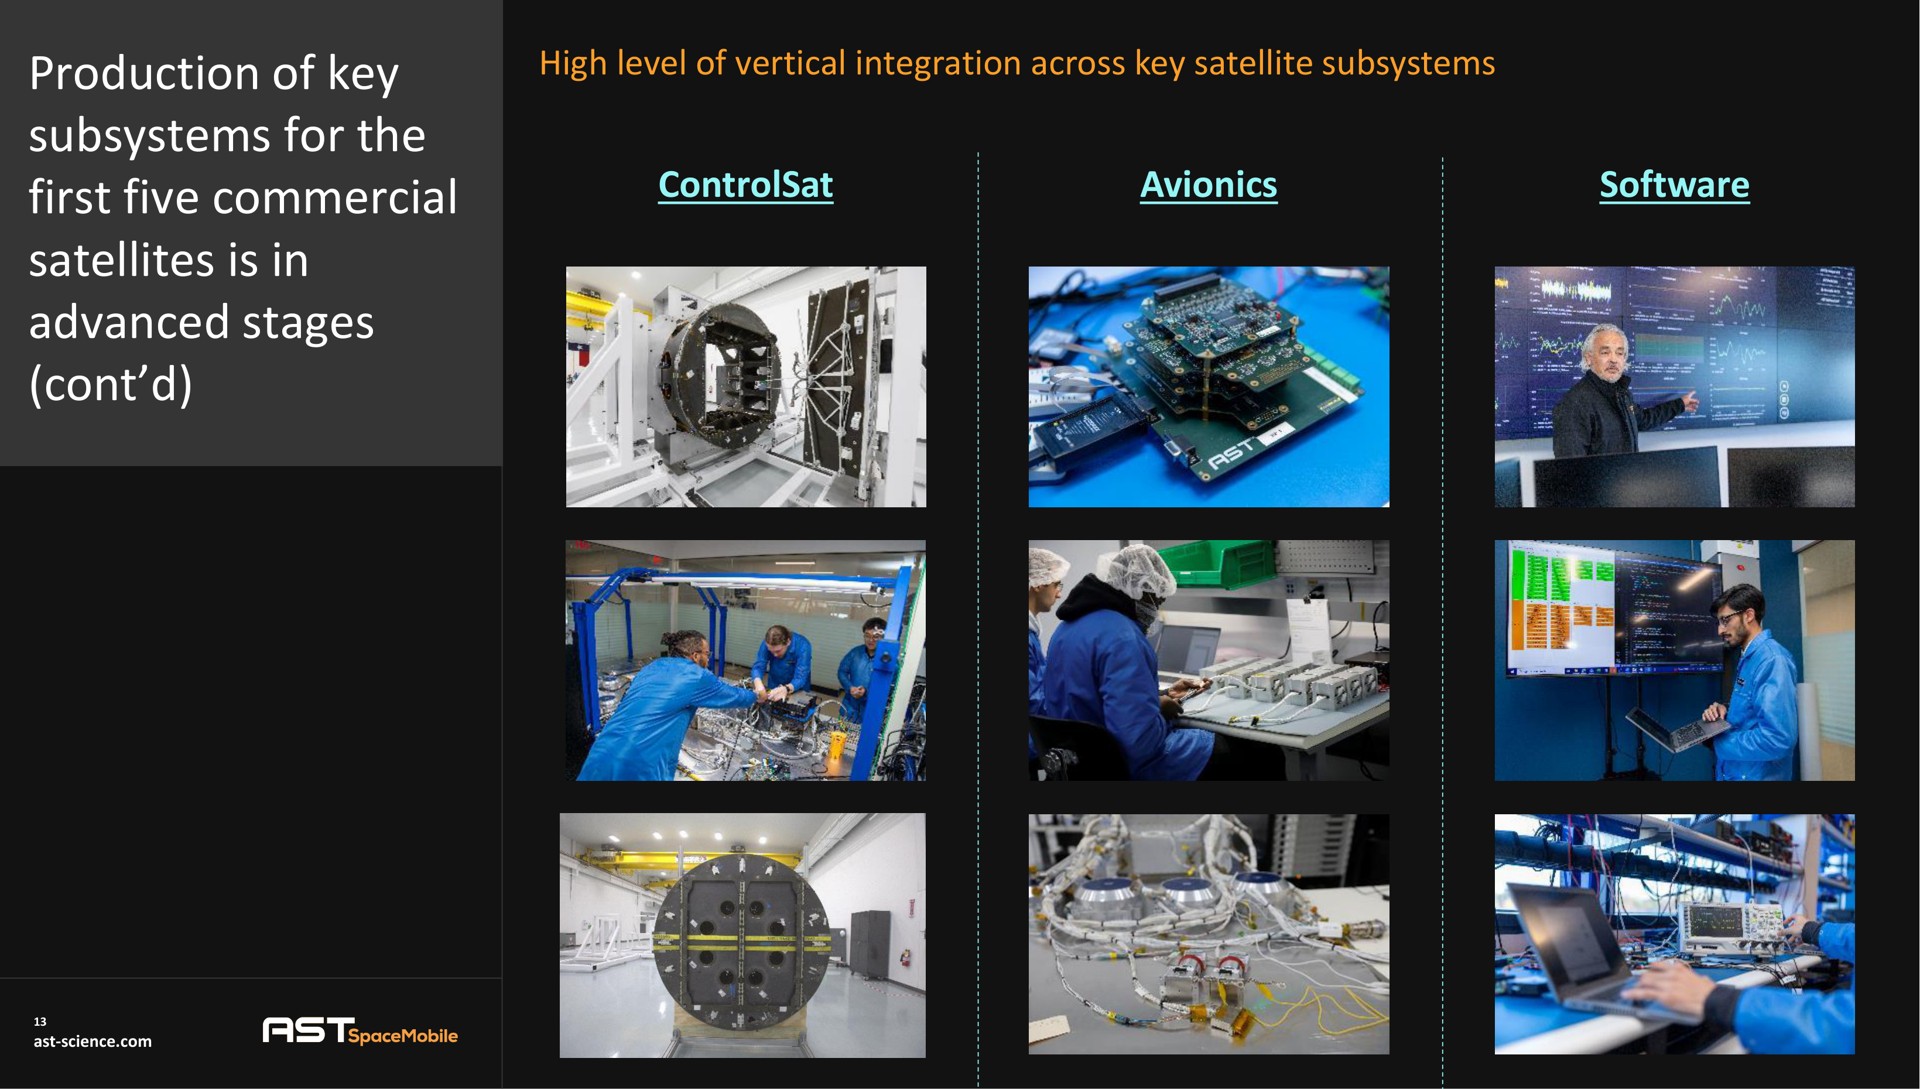 high level of vertical integration across key satellite subsystems production of key subsystems for the first five commercial satellites is in advanced stages reel a | AST SpaceMobile